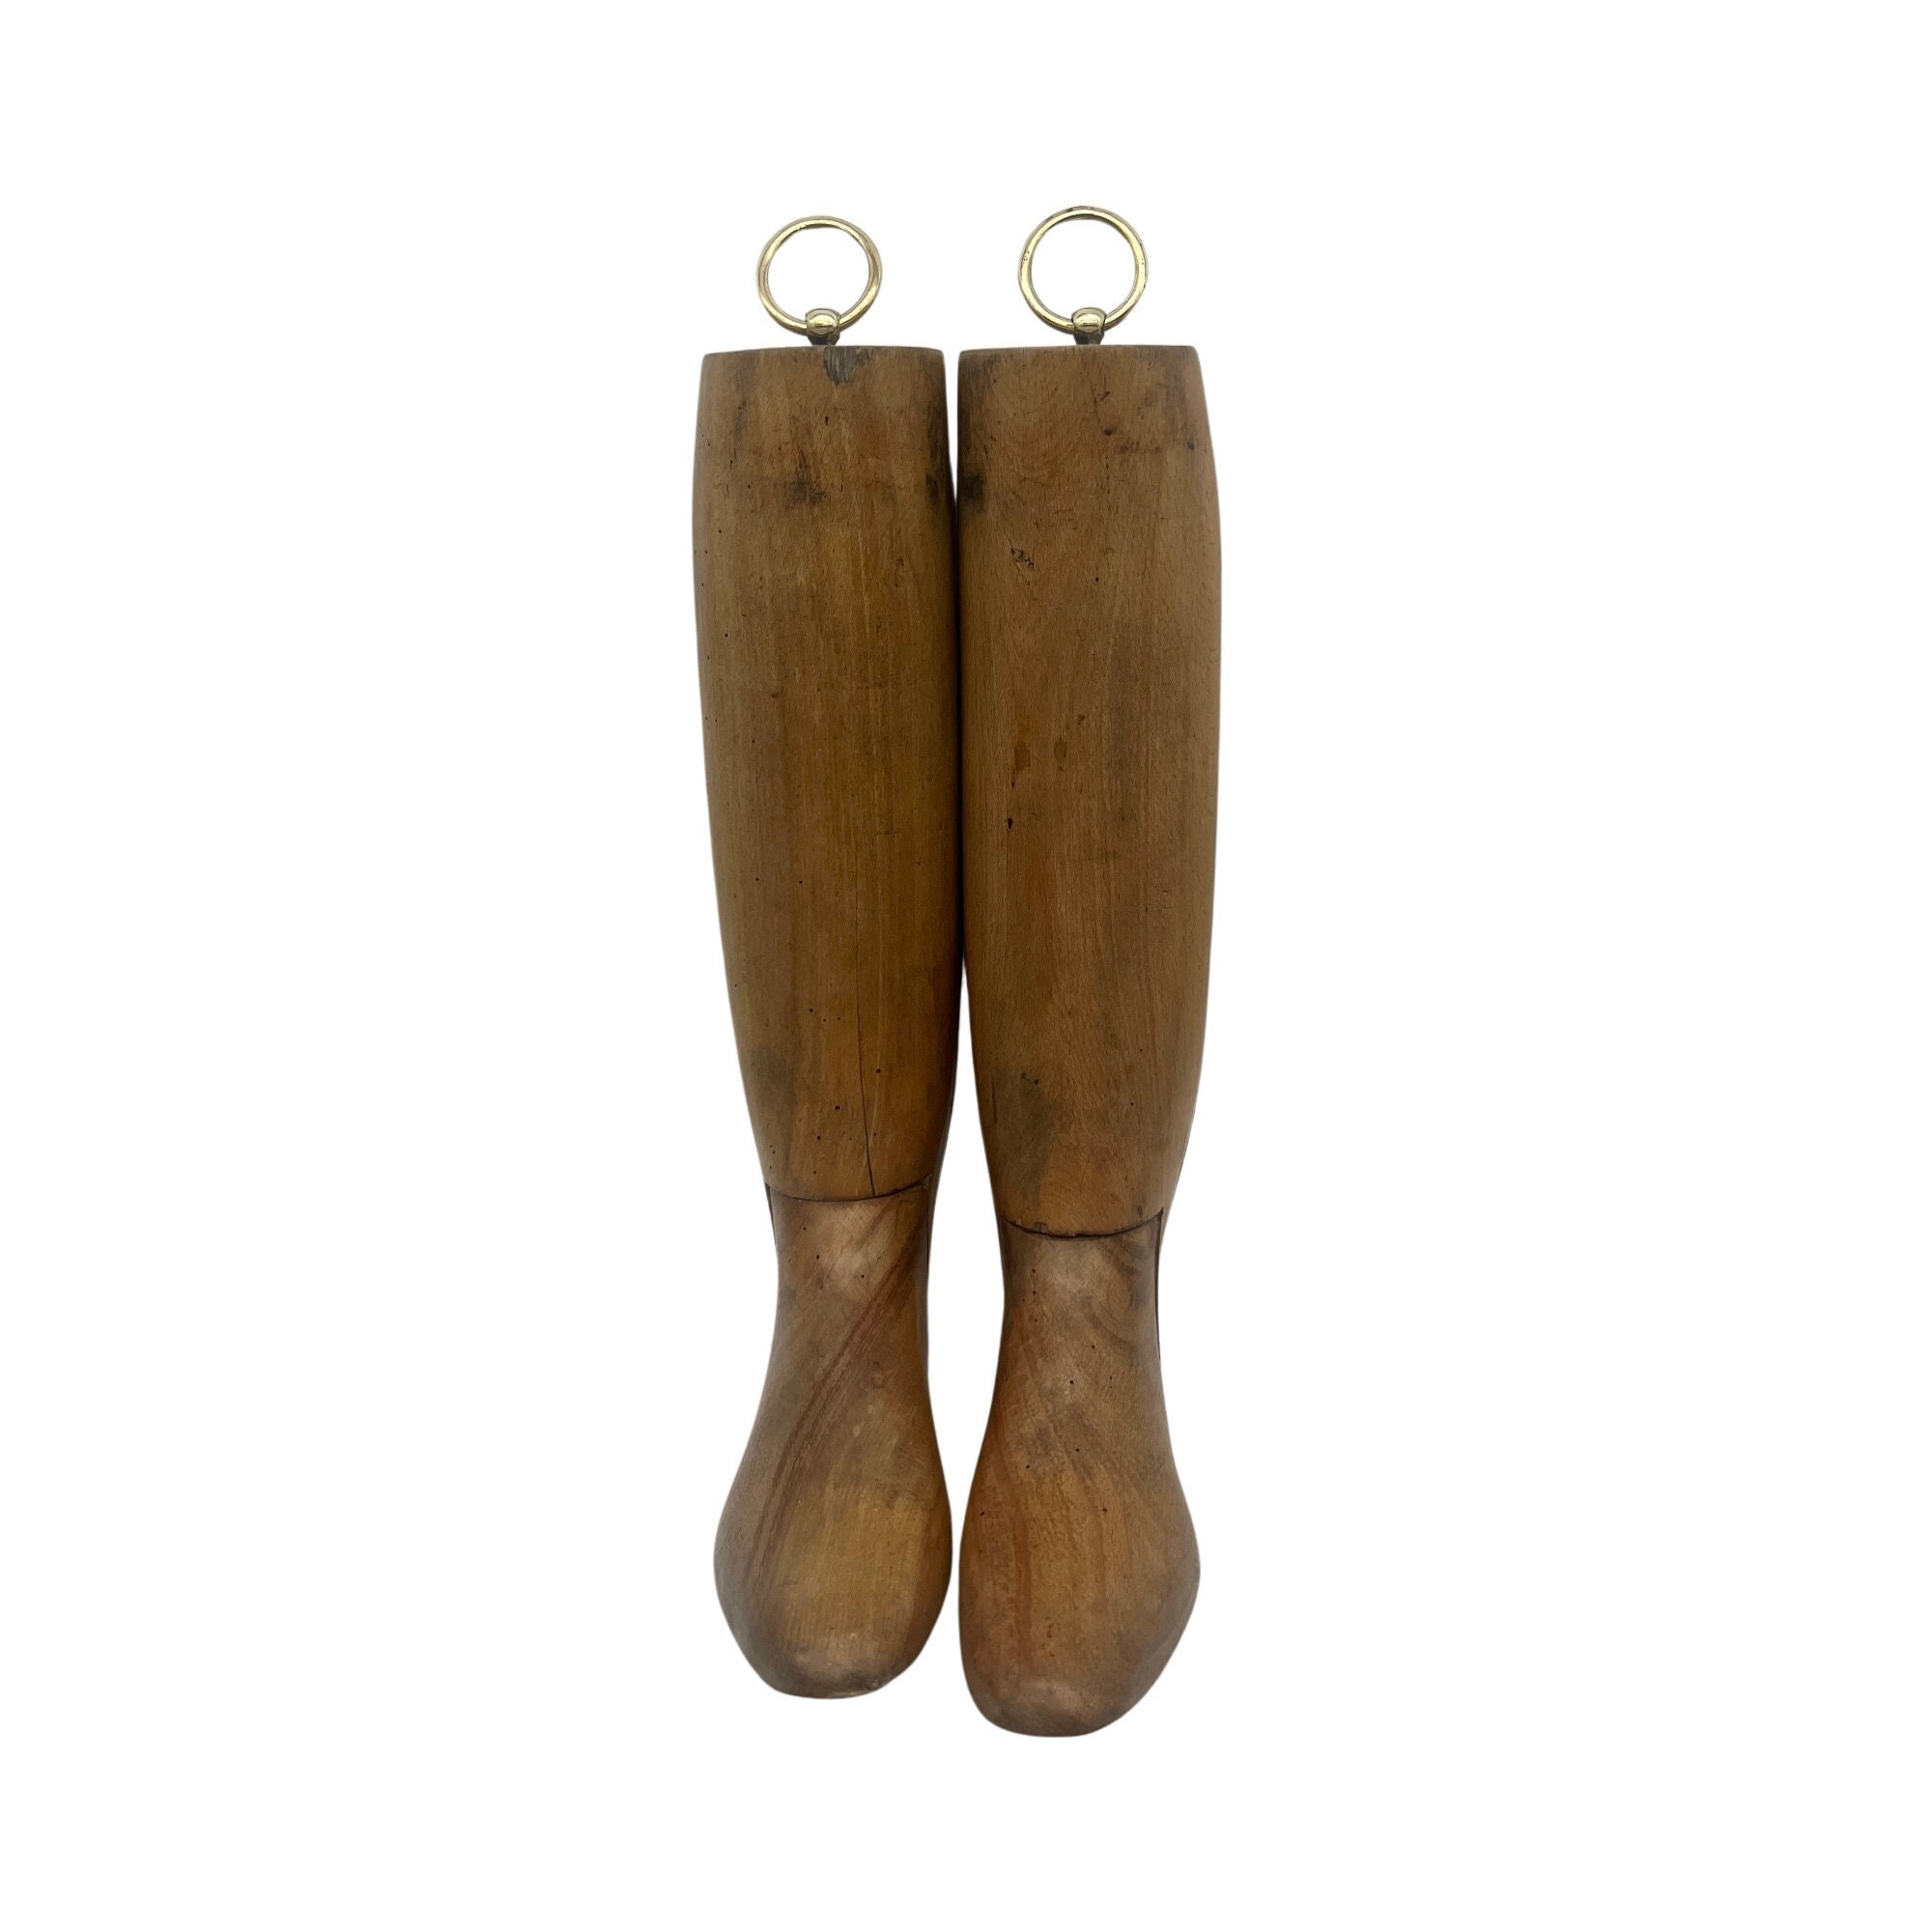 Boot Trees Boot Shapers Boot Stands Perfect for Closet Organization  Complementary Black Tie-on Wood Tags for Custom Personalization. 